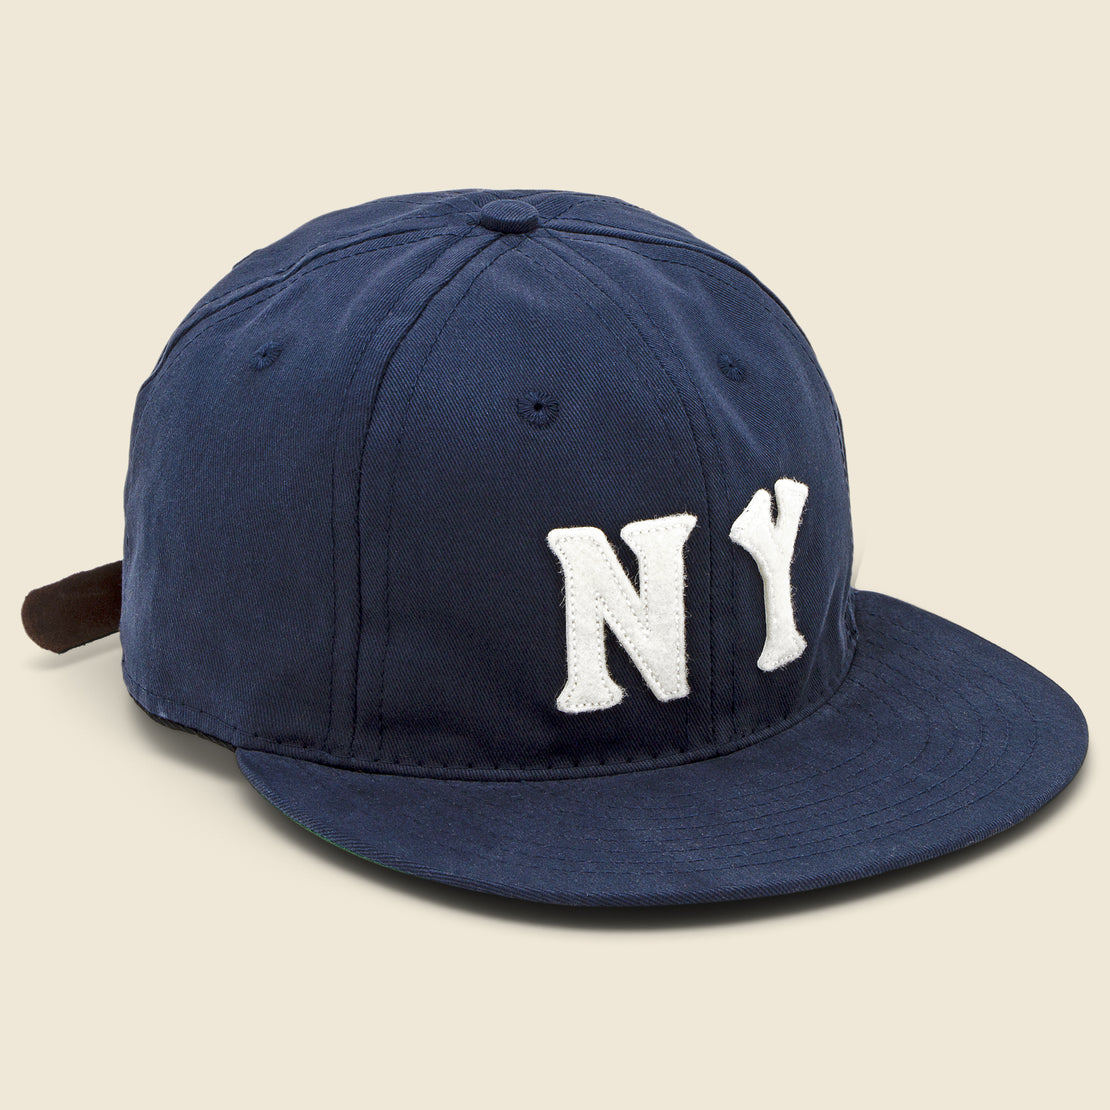 Ebbets Field Flannels NY Black Yankees Cotton Hat - Navy